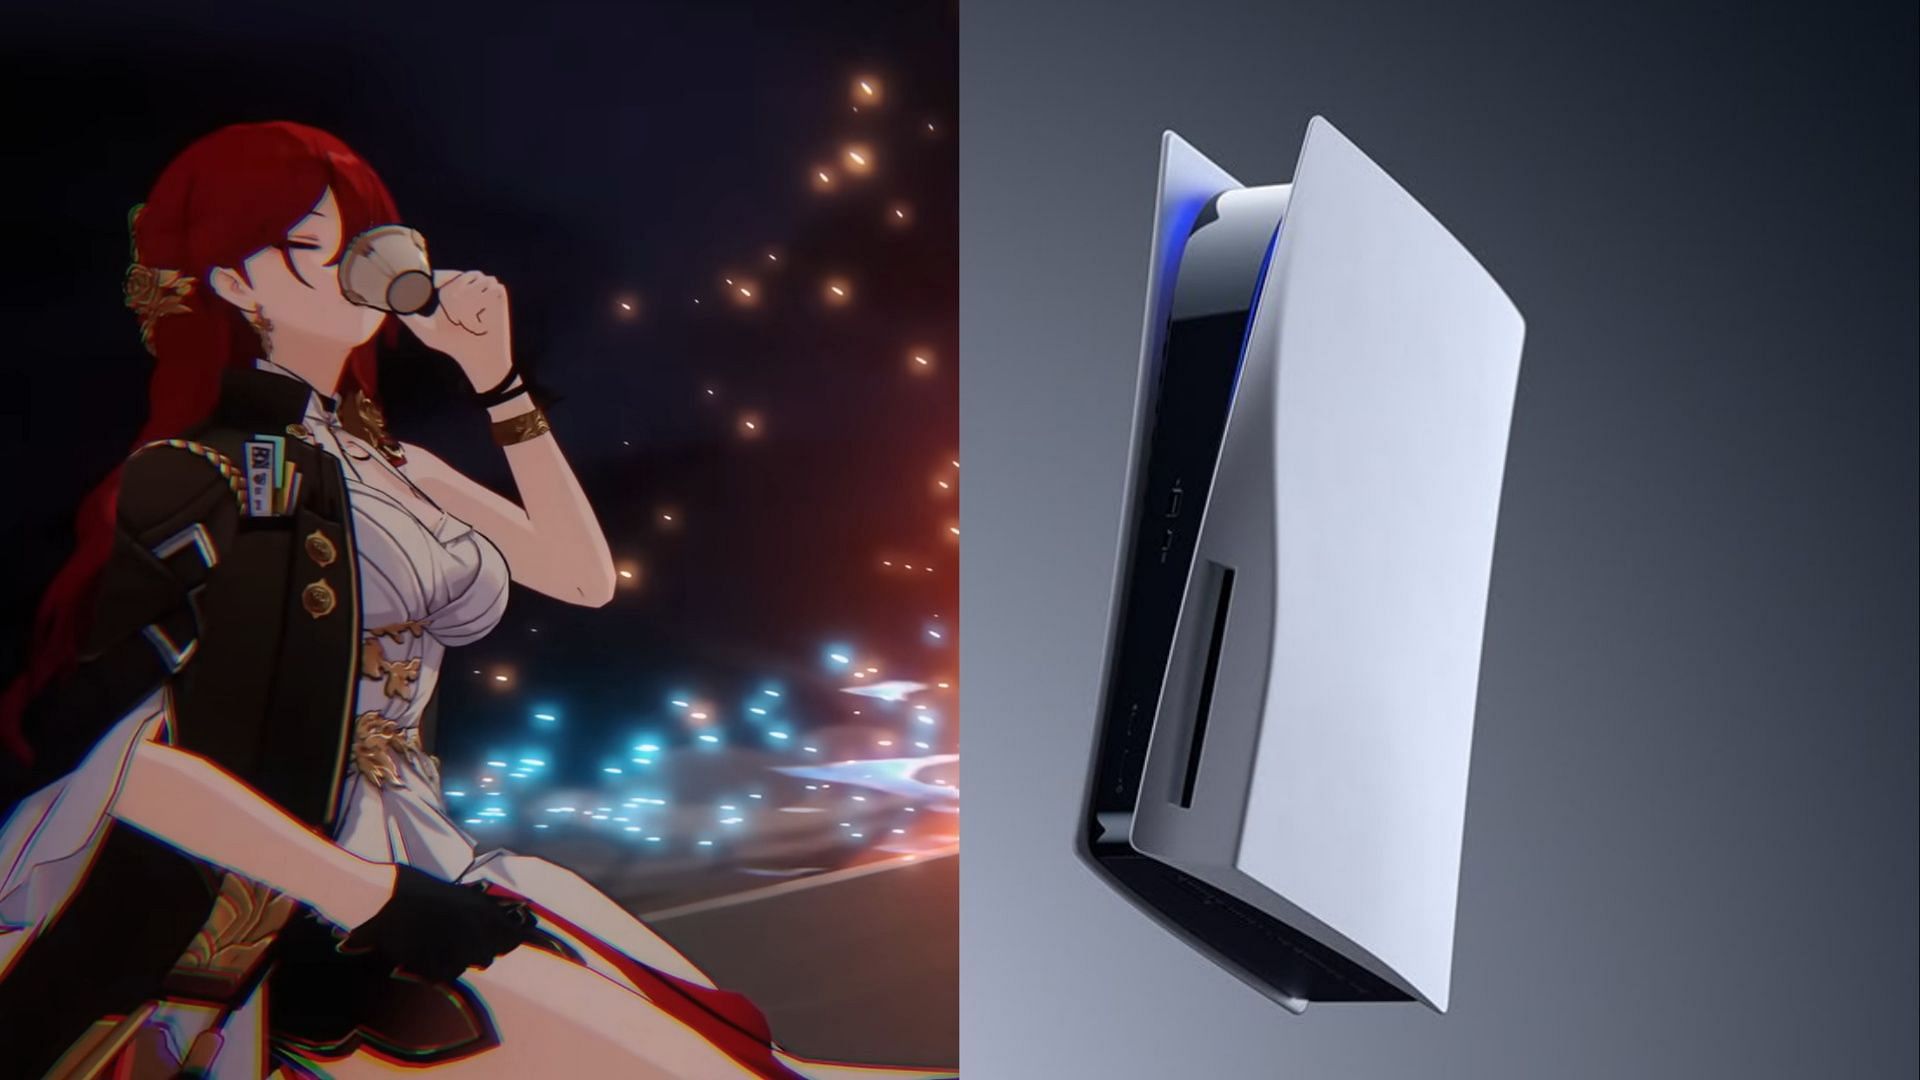 Will Honkai Star Rail finally release on consoles? (Images via HoYoverse and PlayStation)